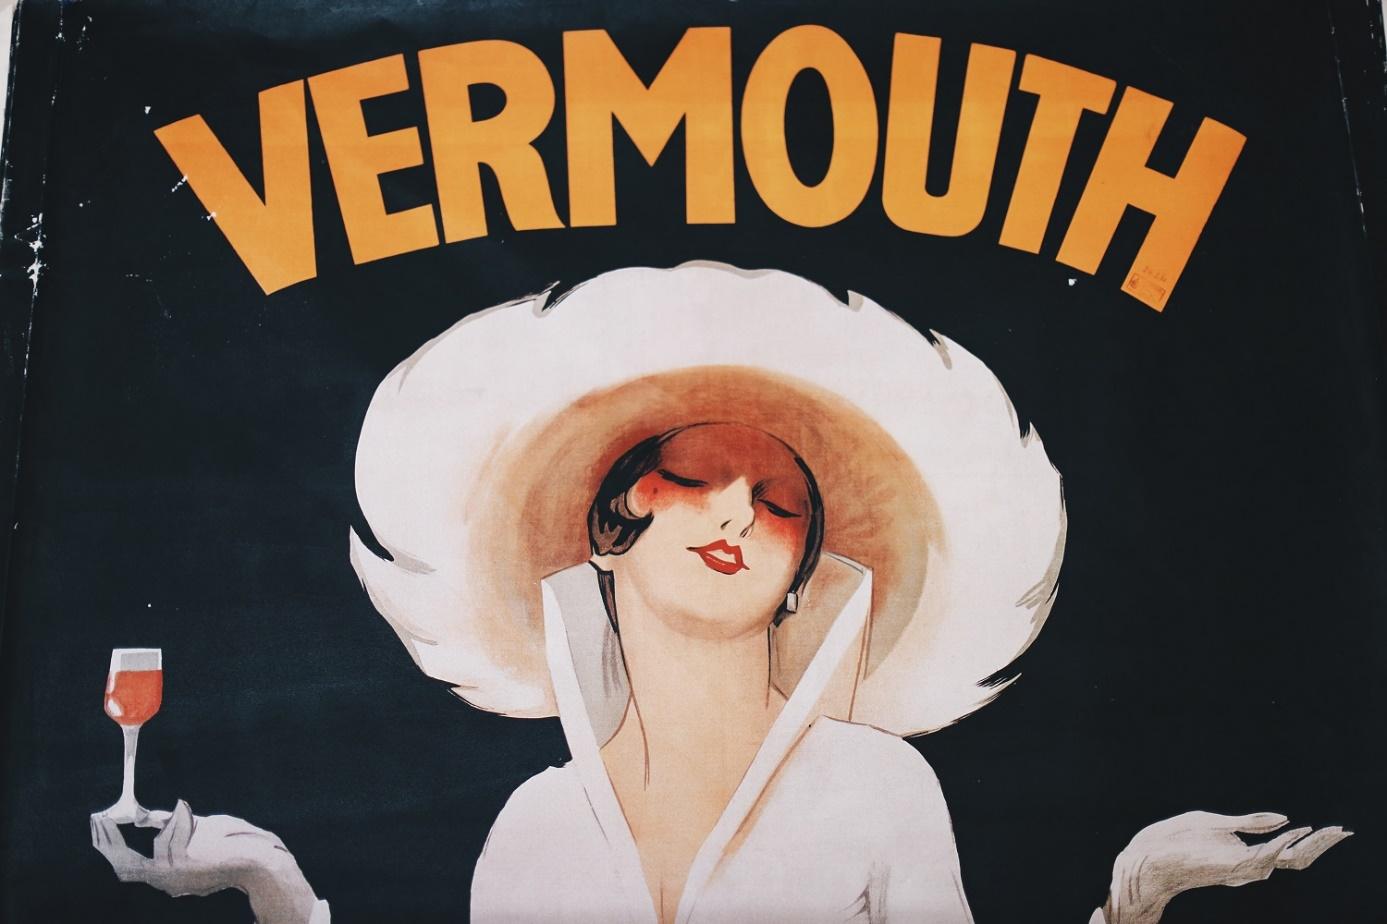 The history of vermouth